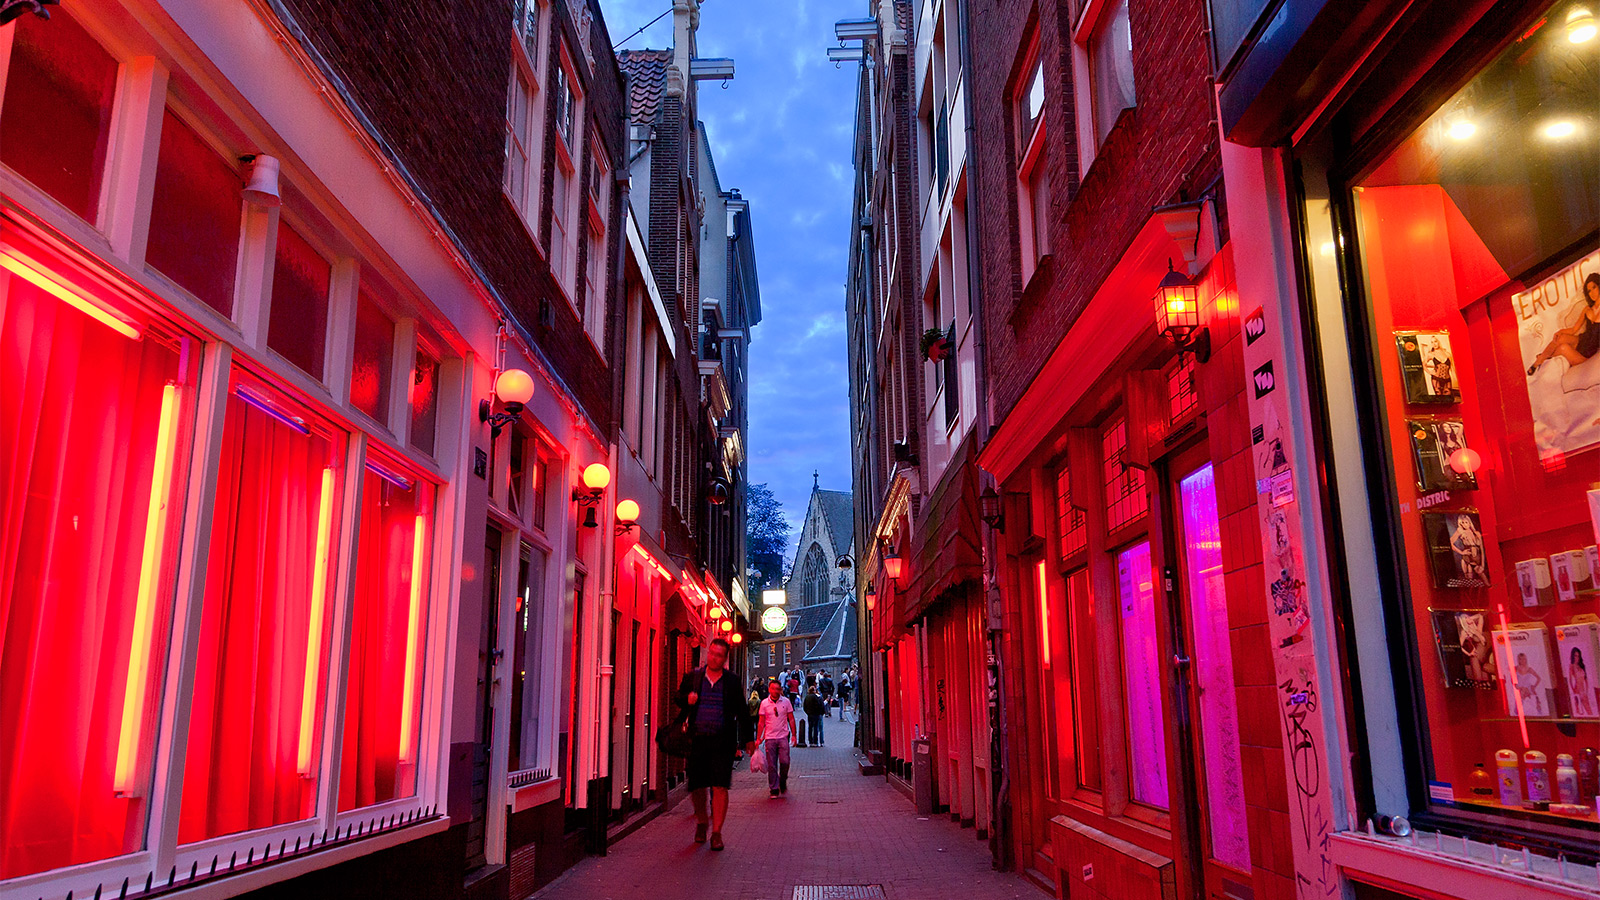 Amsterdam will ban Red Light District tours starting in 2020 | CNN Travel